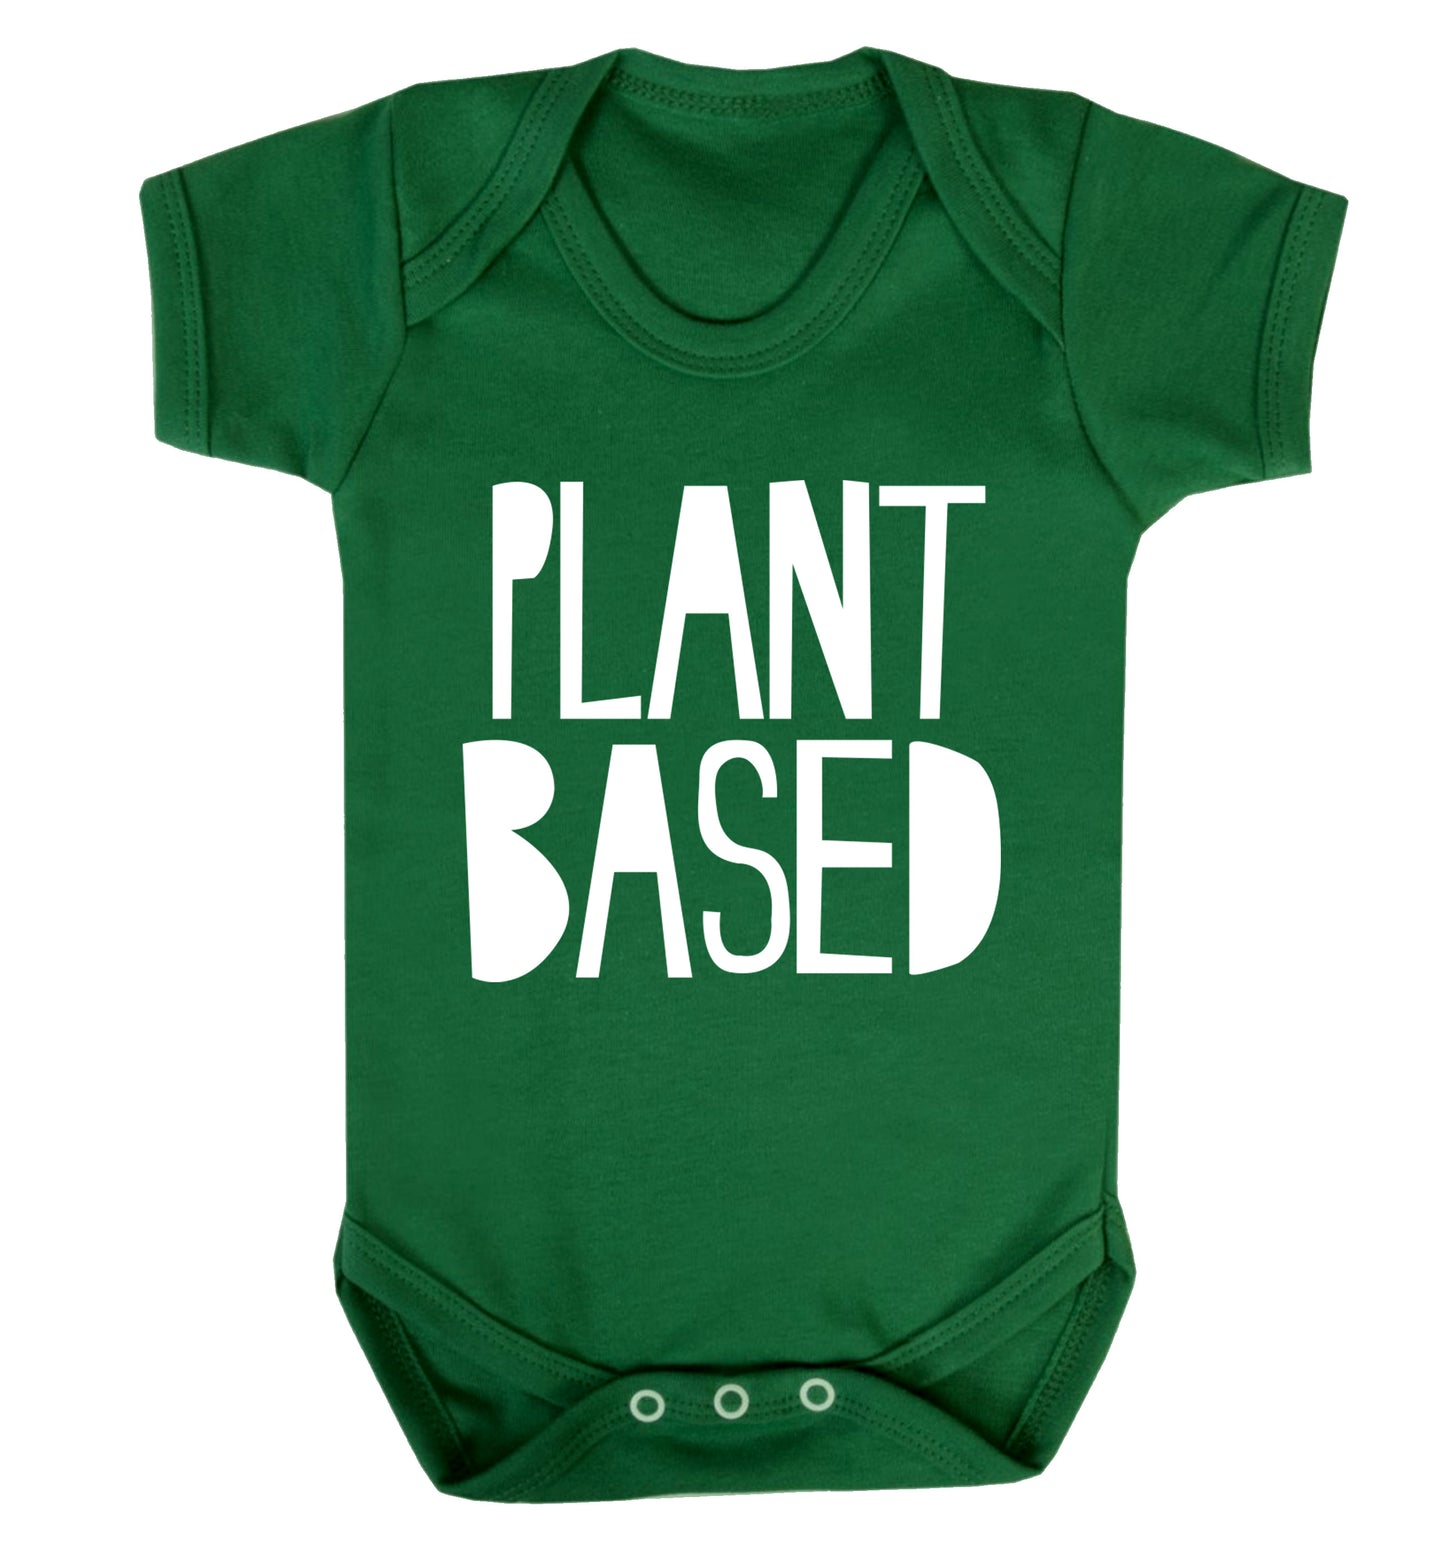 Plant Based Baby Vest green 18-24 months